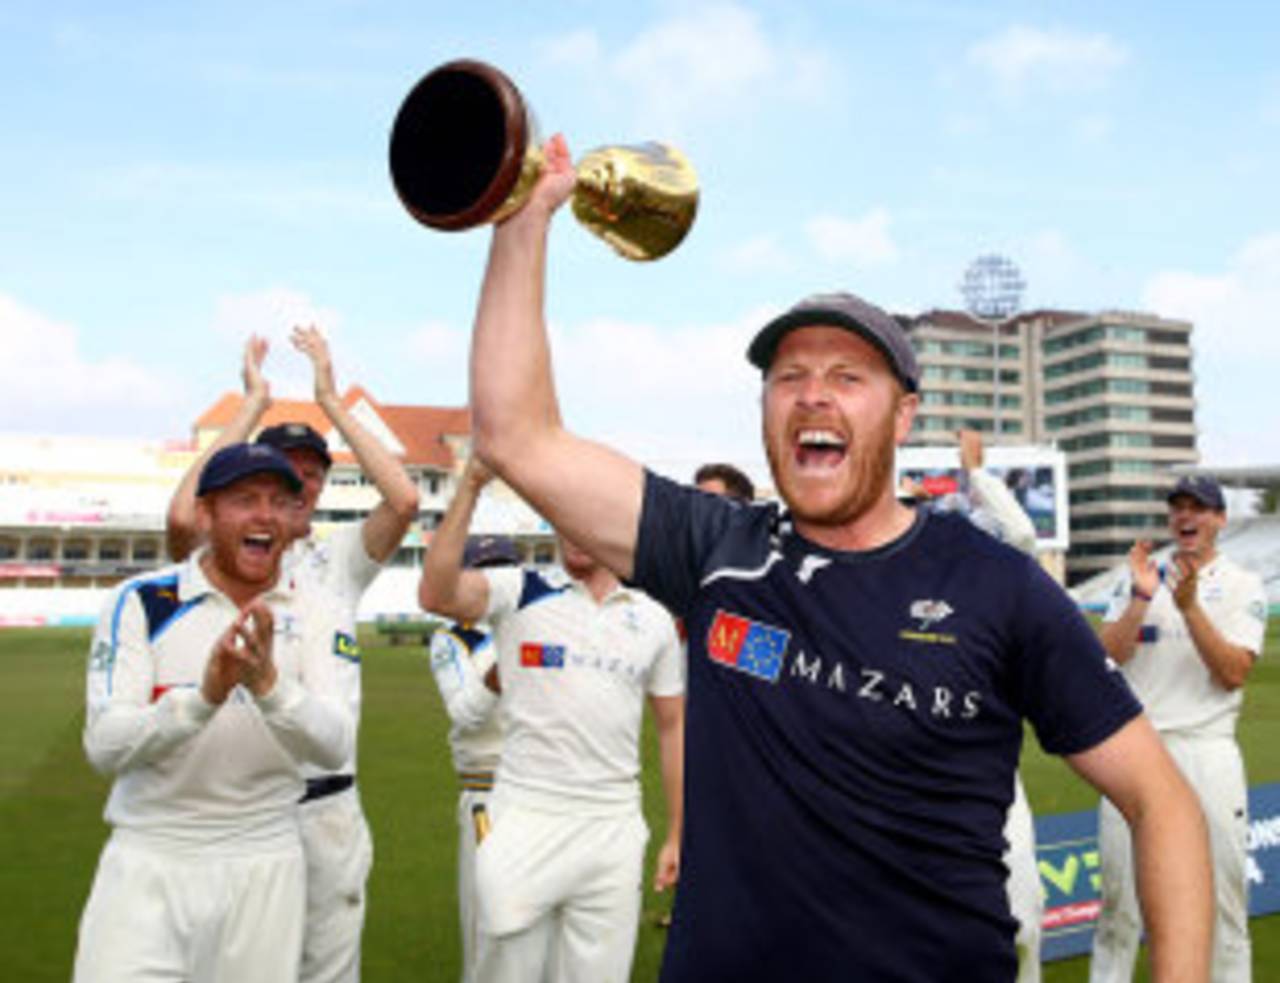 Andrew Gale, Yorkshire's suspended captain, had to wait until the official presentation had finished to get his hands on the Championship trophy&nbsp;&nbsp;&bull;&nbsp;&nbsp;Getty Images